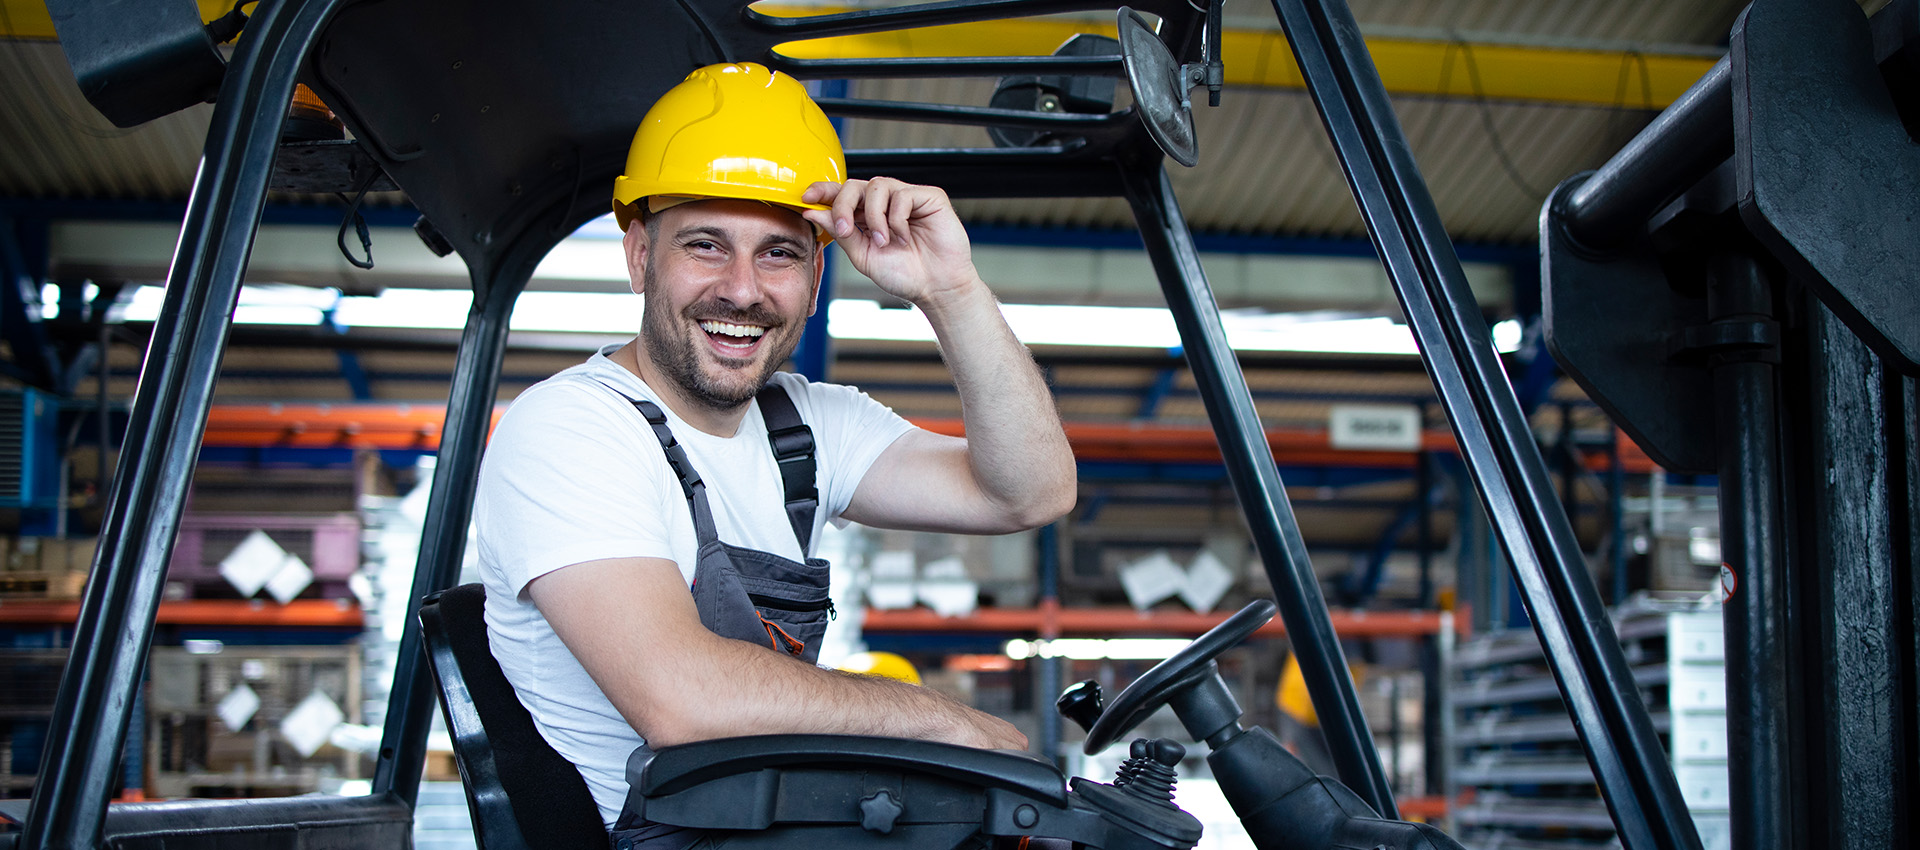 A complete guide on Forklift Safety for operators